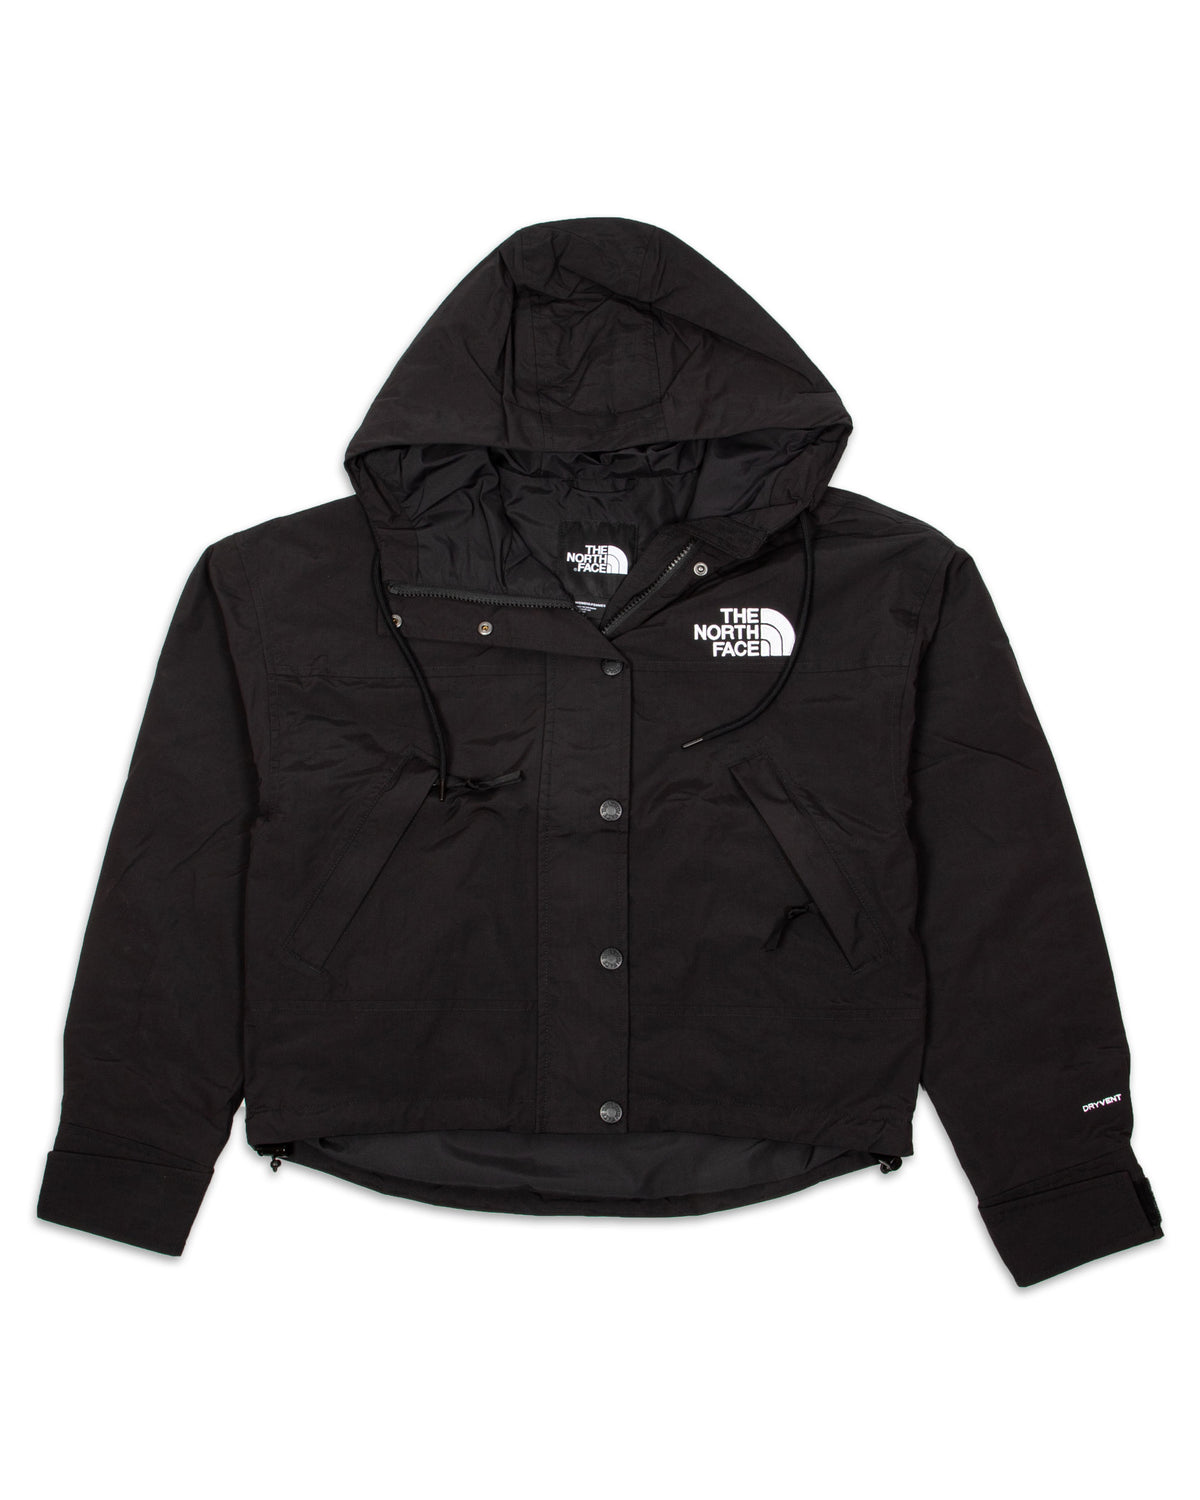 Crop Jacket Woman The North Face Black